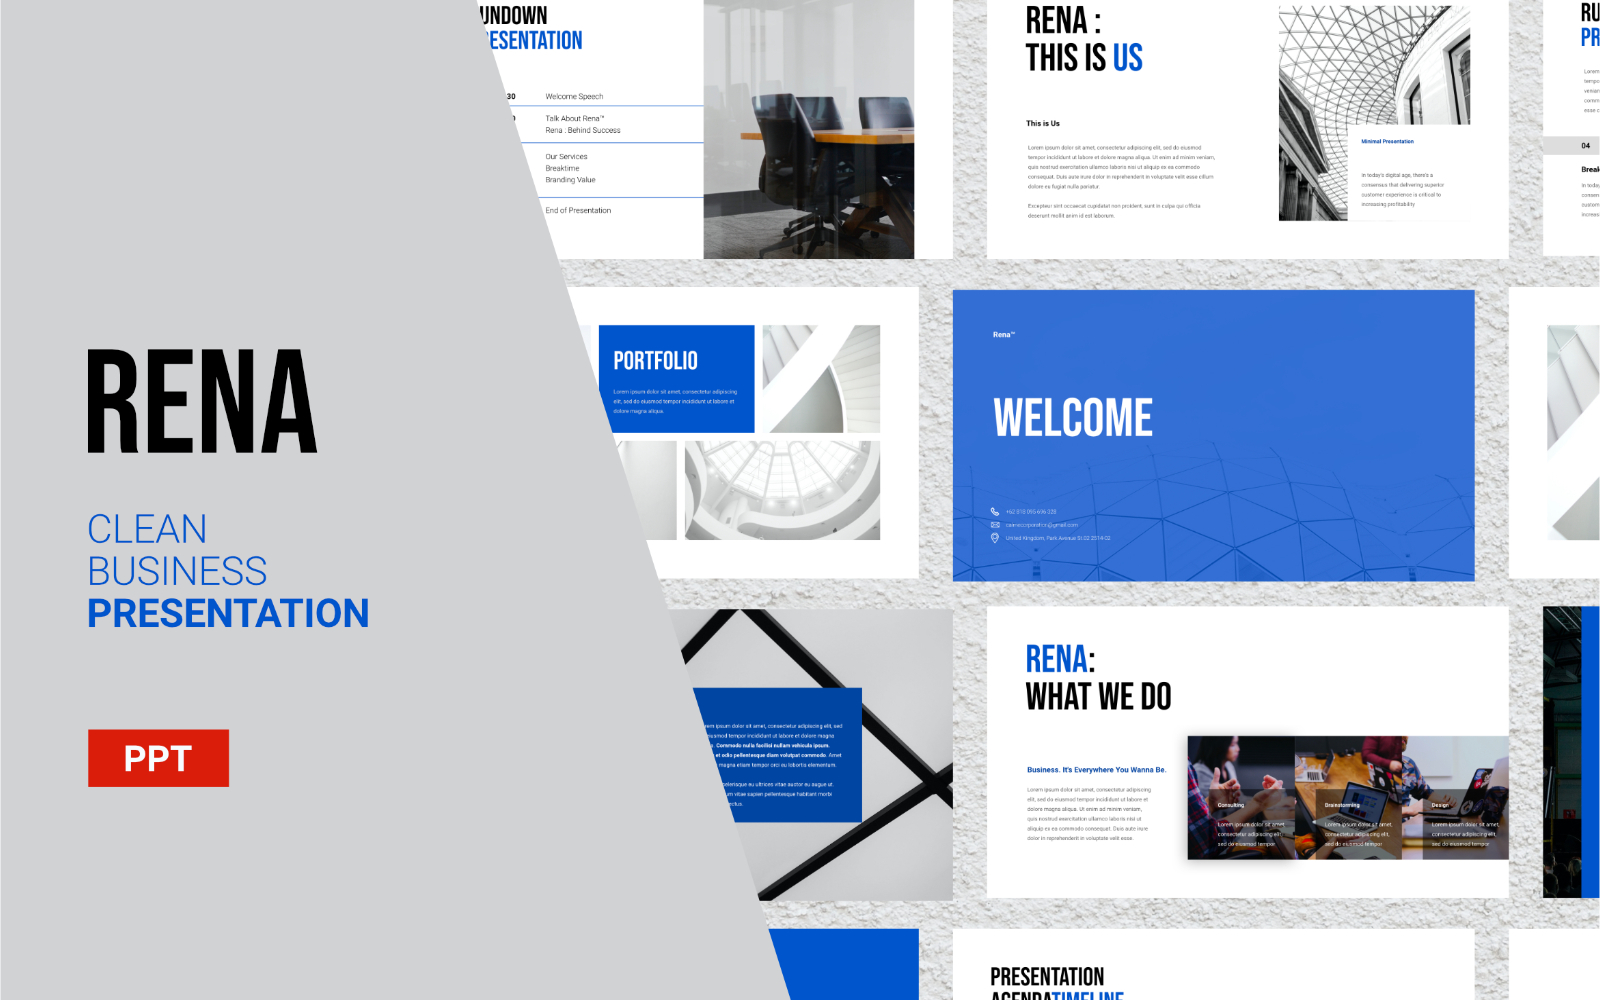 Rena - Clean Business Presentation - Powerpoint Template